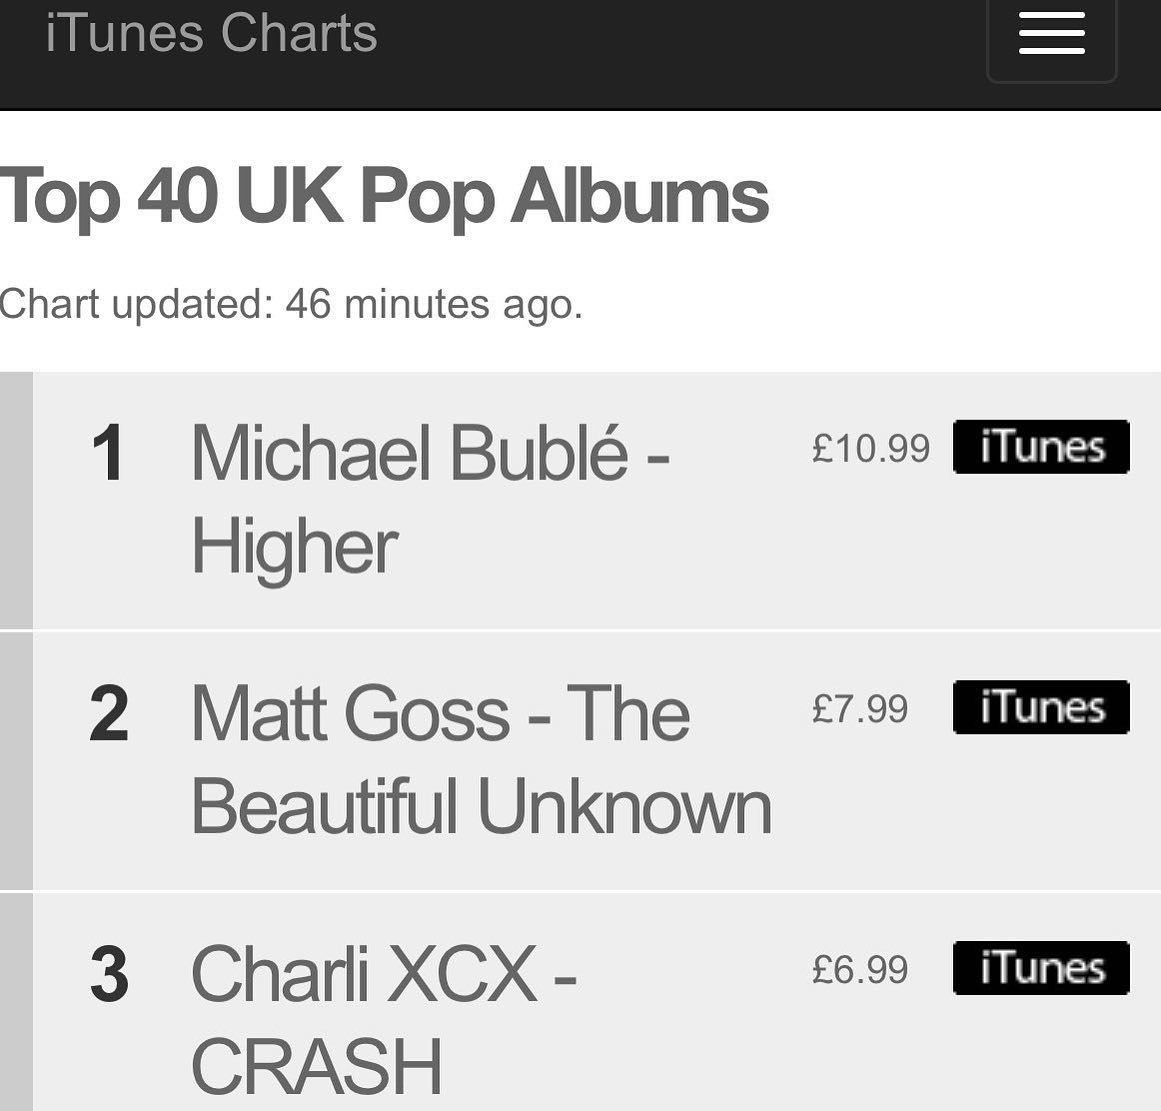 Matt’s new album THE BEAUTIFUL UNKNOWN is currently Number 2 on the ITunes Charts.
Get your friends and family to download this incredible album and we can get it to Number 1

#mattgoss #bros #uk #newmusic #music #singer #london #songwriter #singersongwriter #instamusic #musician #musicartist #musiciansofinstagram #musicbusiness #musicindustry #fashion #newalbum #newsingle #somewheretofall #betterwithyou #thebeautifulunknown #saved